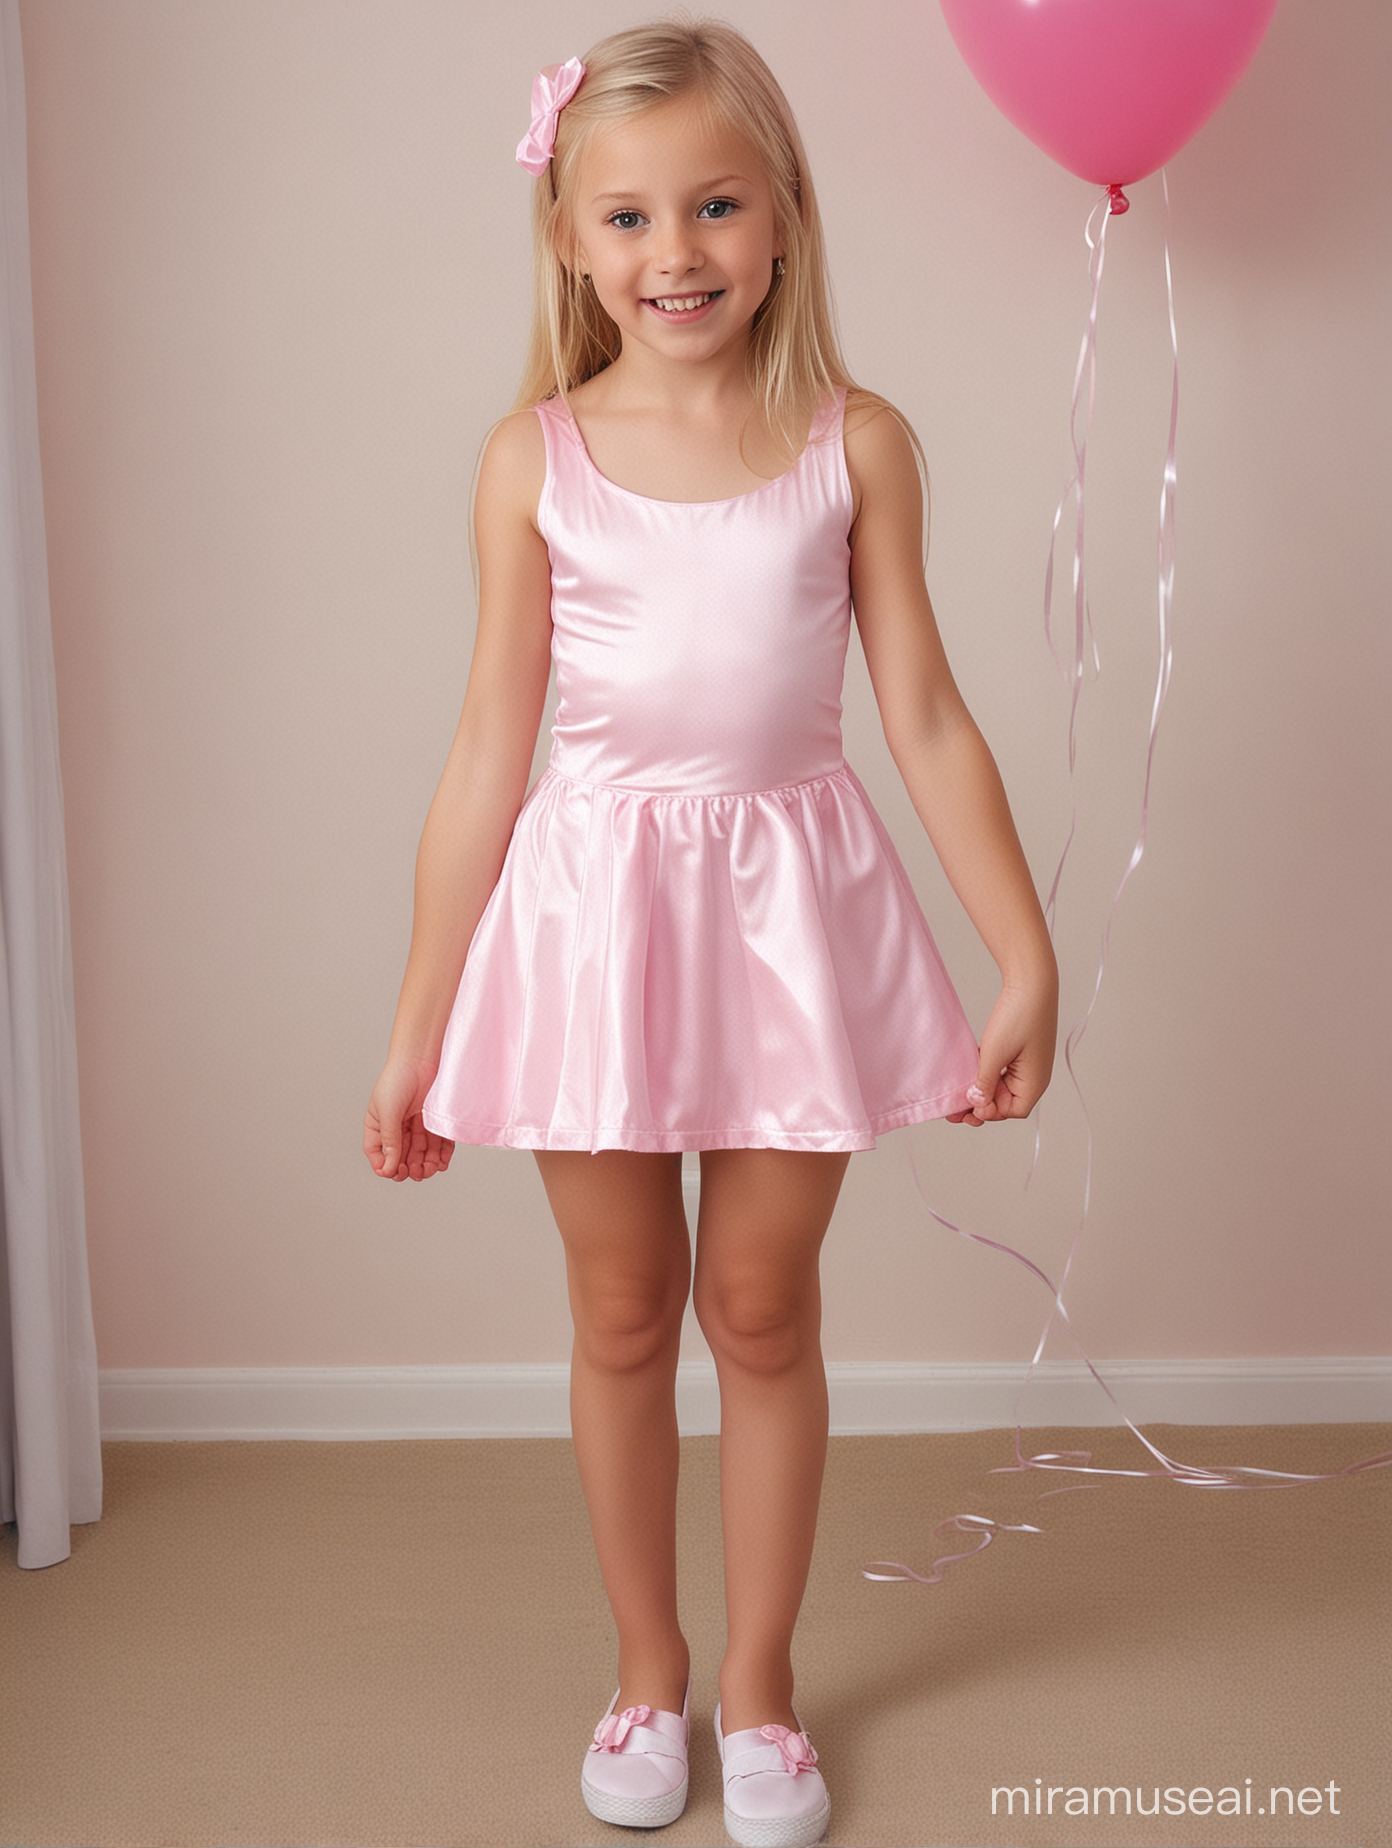 Adorable 10YearOld Girl in Elegant Pink and White Party Dress